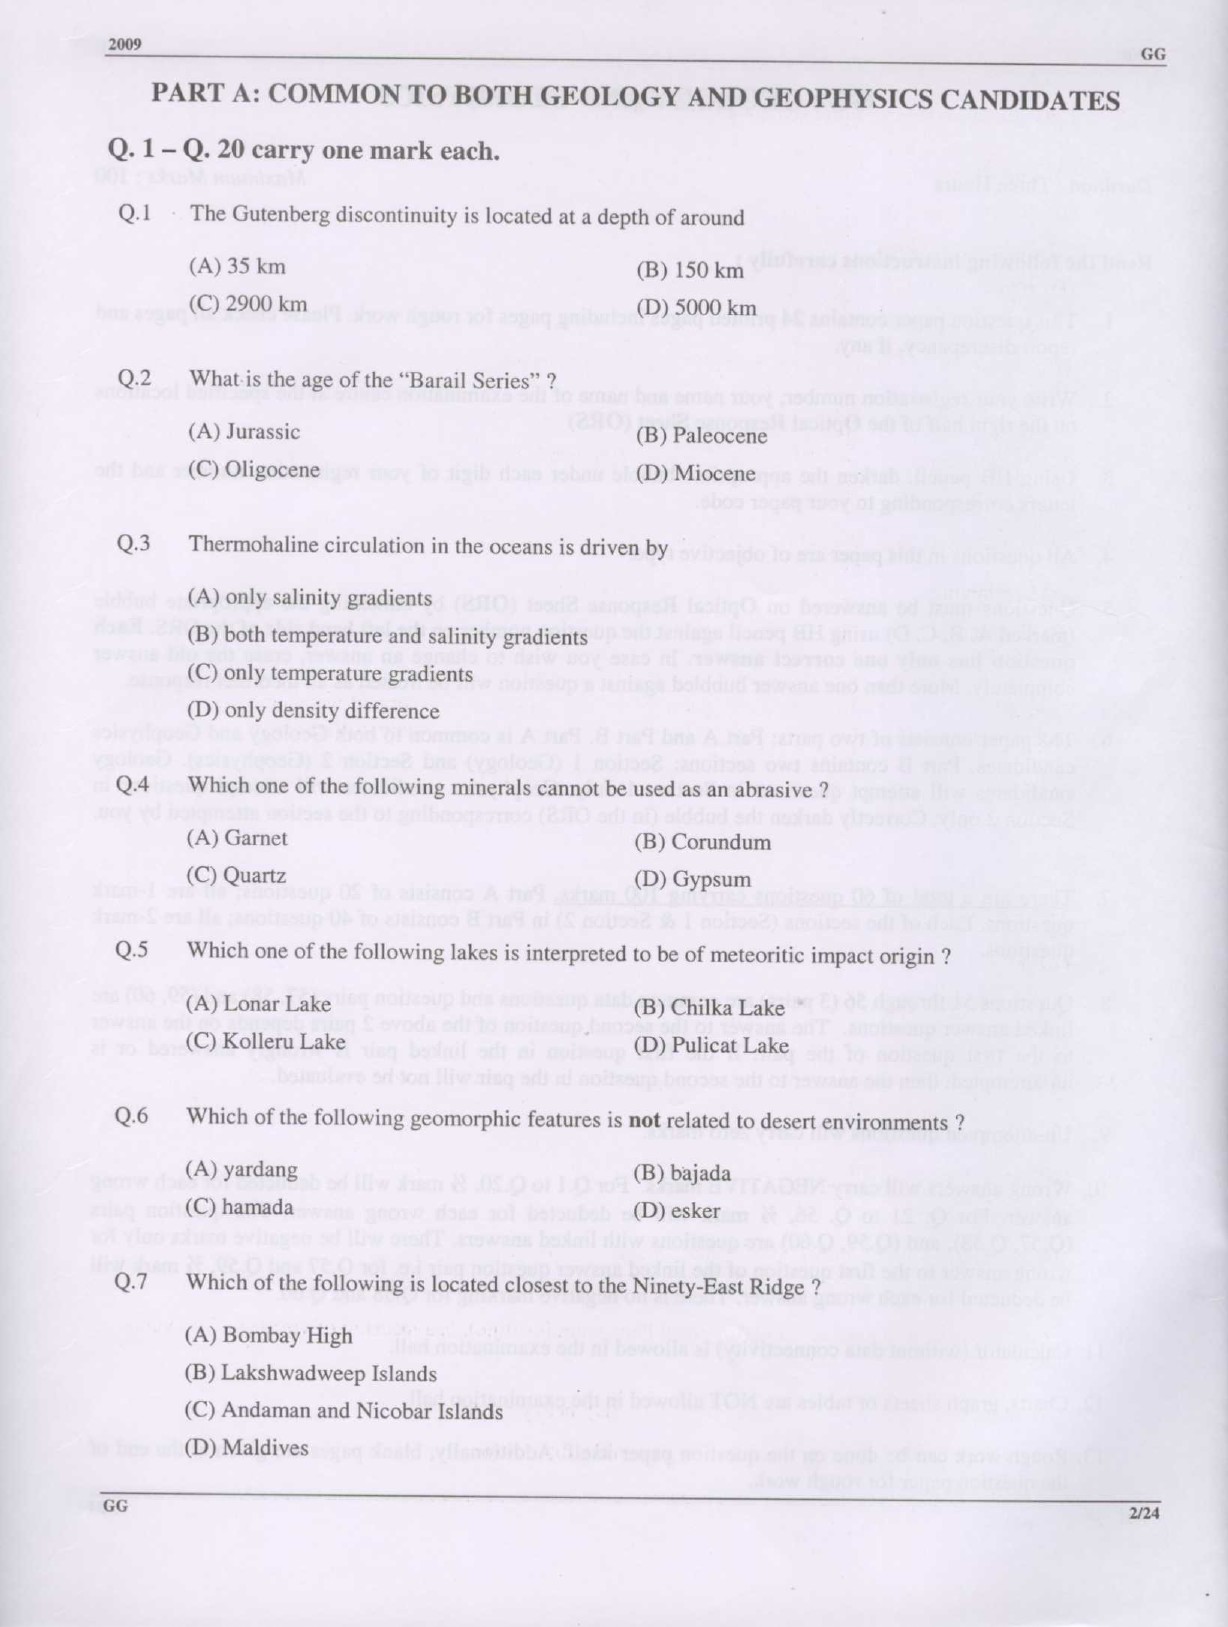 GATE Exam Question Paper 2009 Geology and Geophysics 2